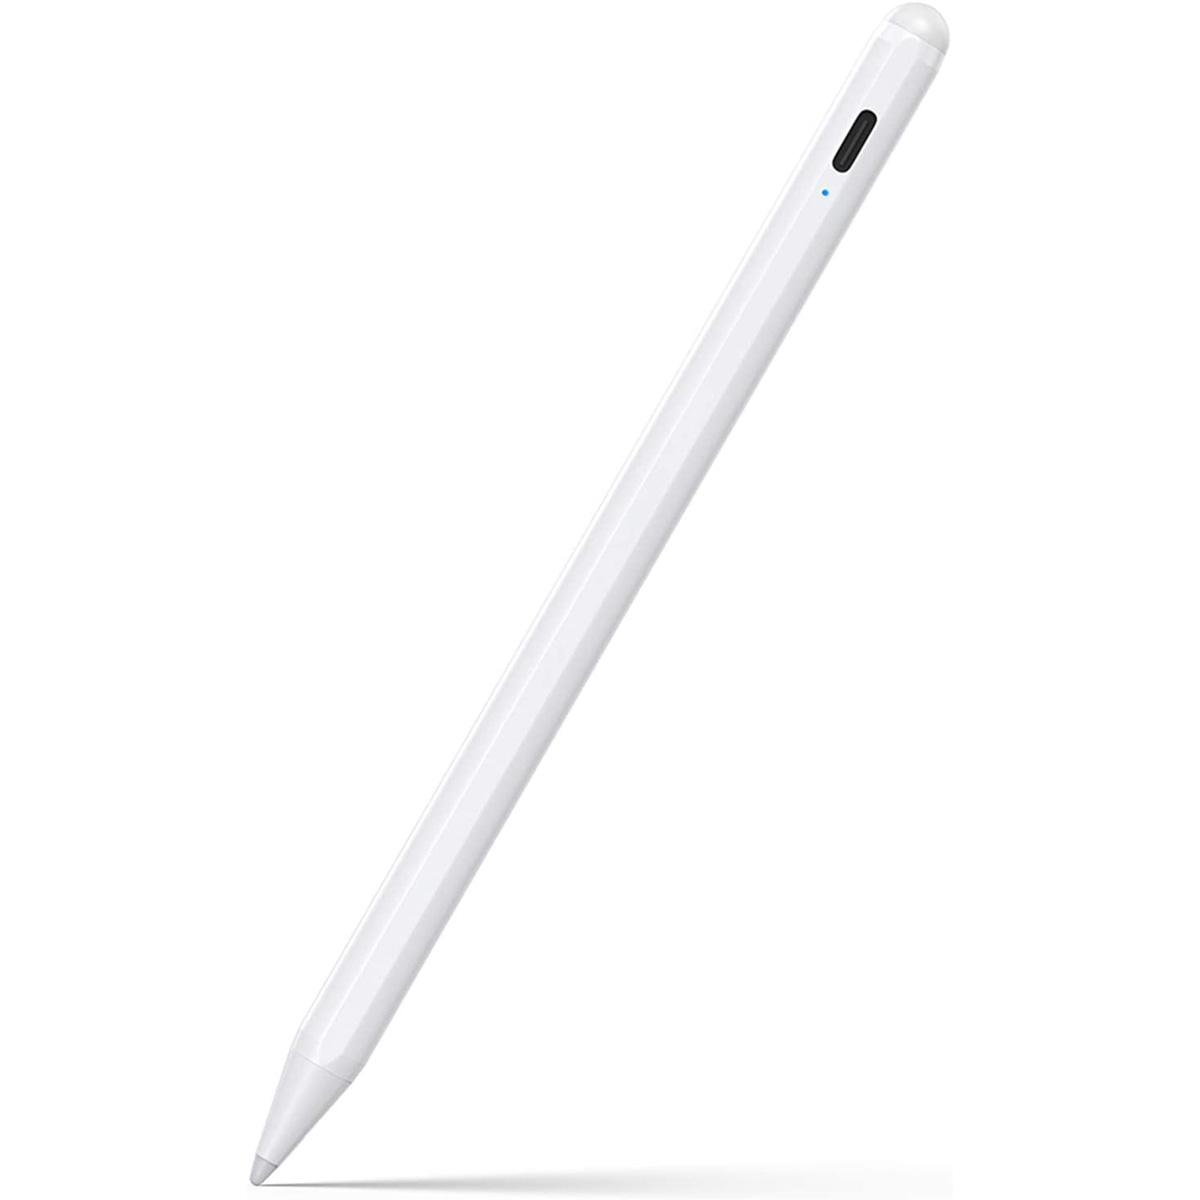 iPad Stylus Pen for iPad with Palm Rejection for $18.69 Shipped